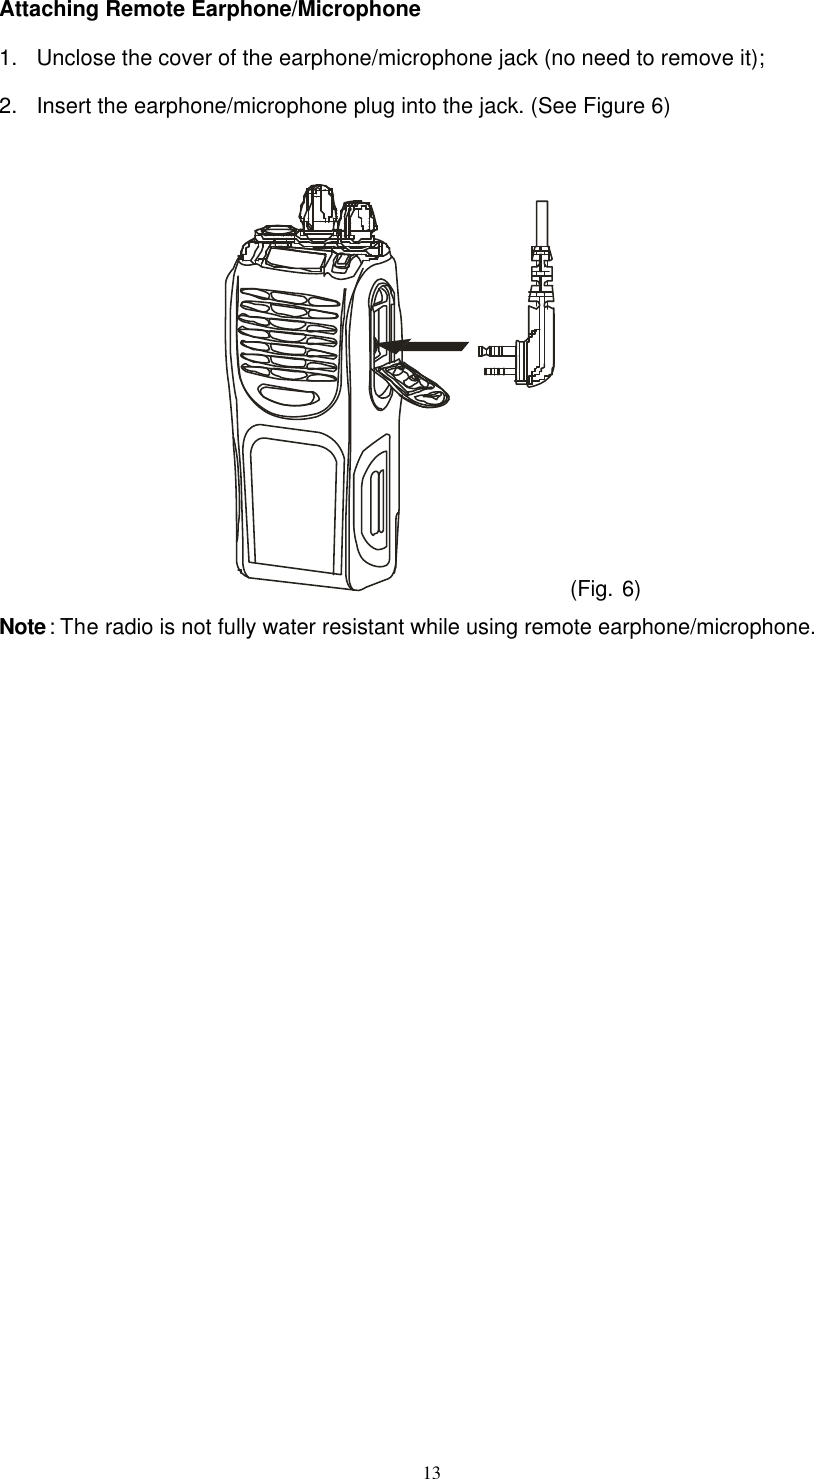  13 Attaching Remote Earphone/Microphone 1. Unclose the cover of the earphone/microphone jack (no need to remove it); 2. Insert the earphone/microphone plug into the jack. (See Figure 6)   (Fig. 6) Note: The radio is not fully water resistant while using remote earphone/microphone.             